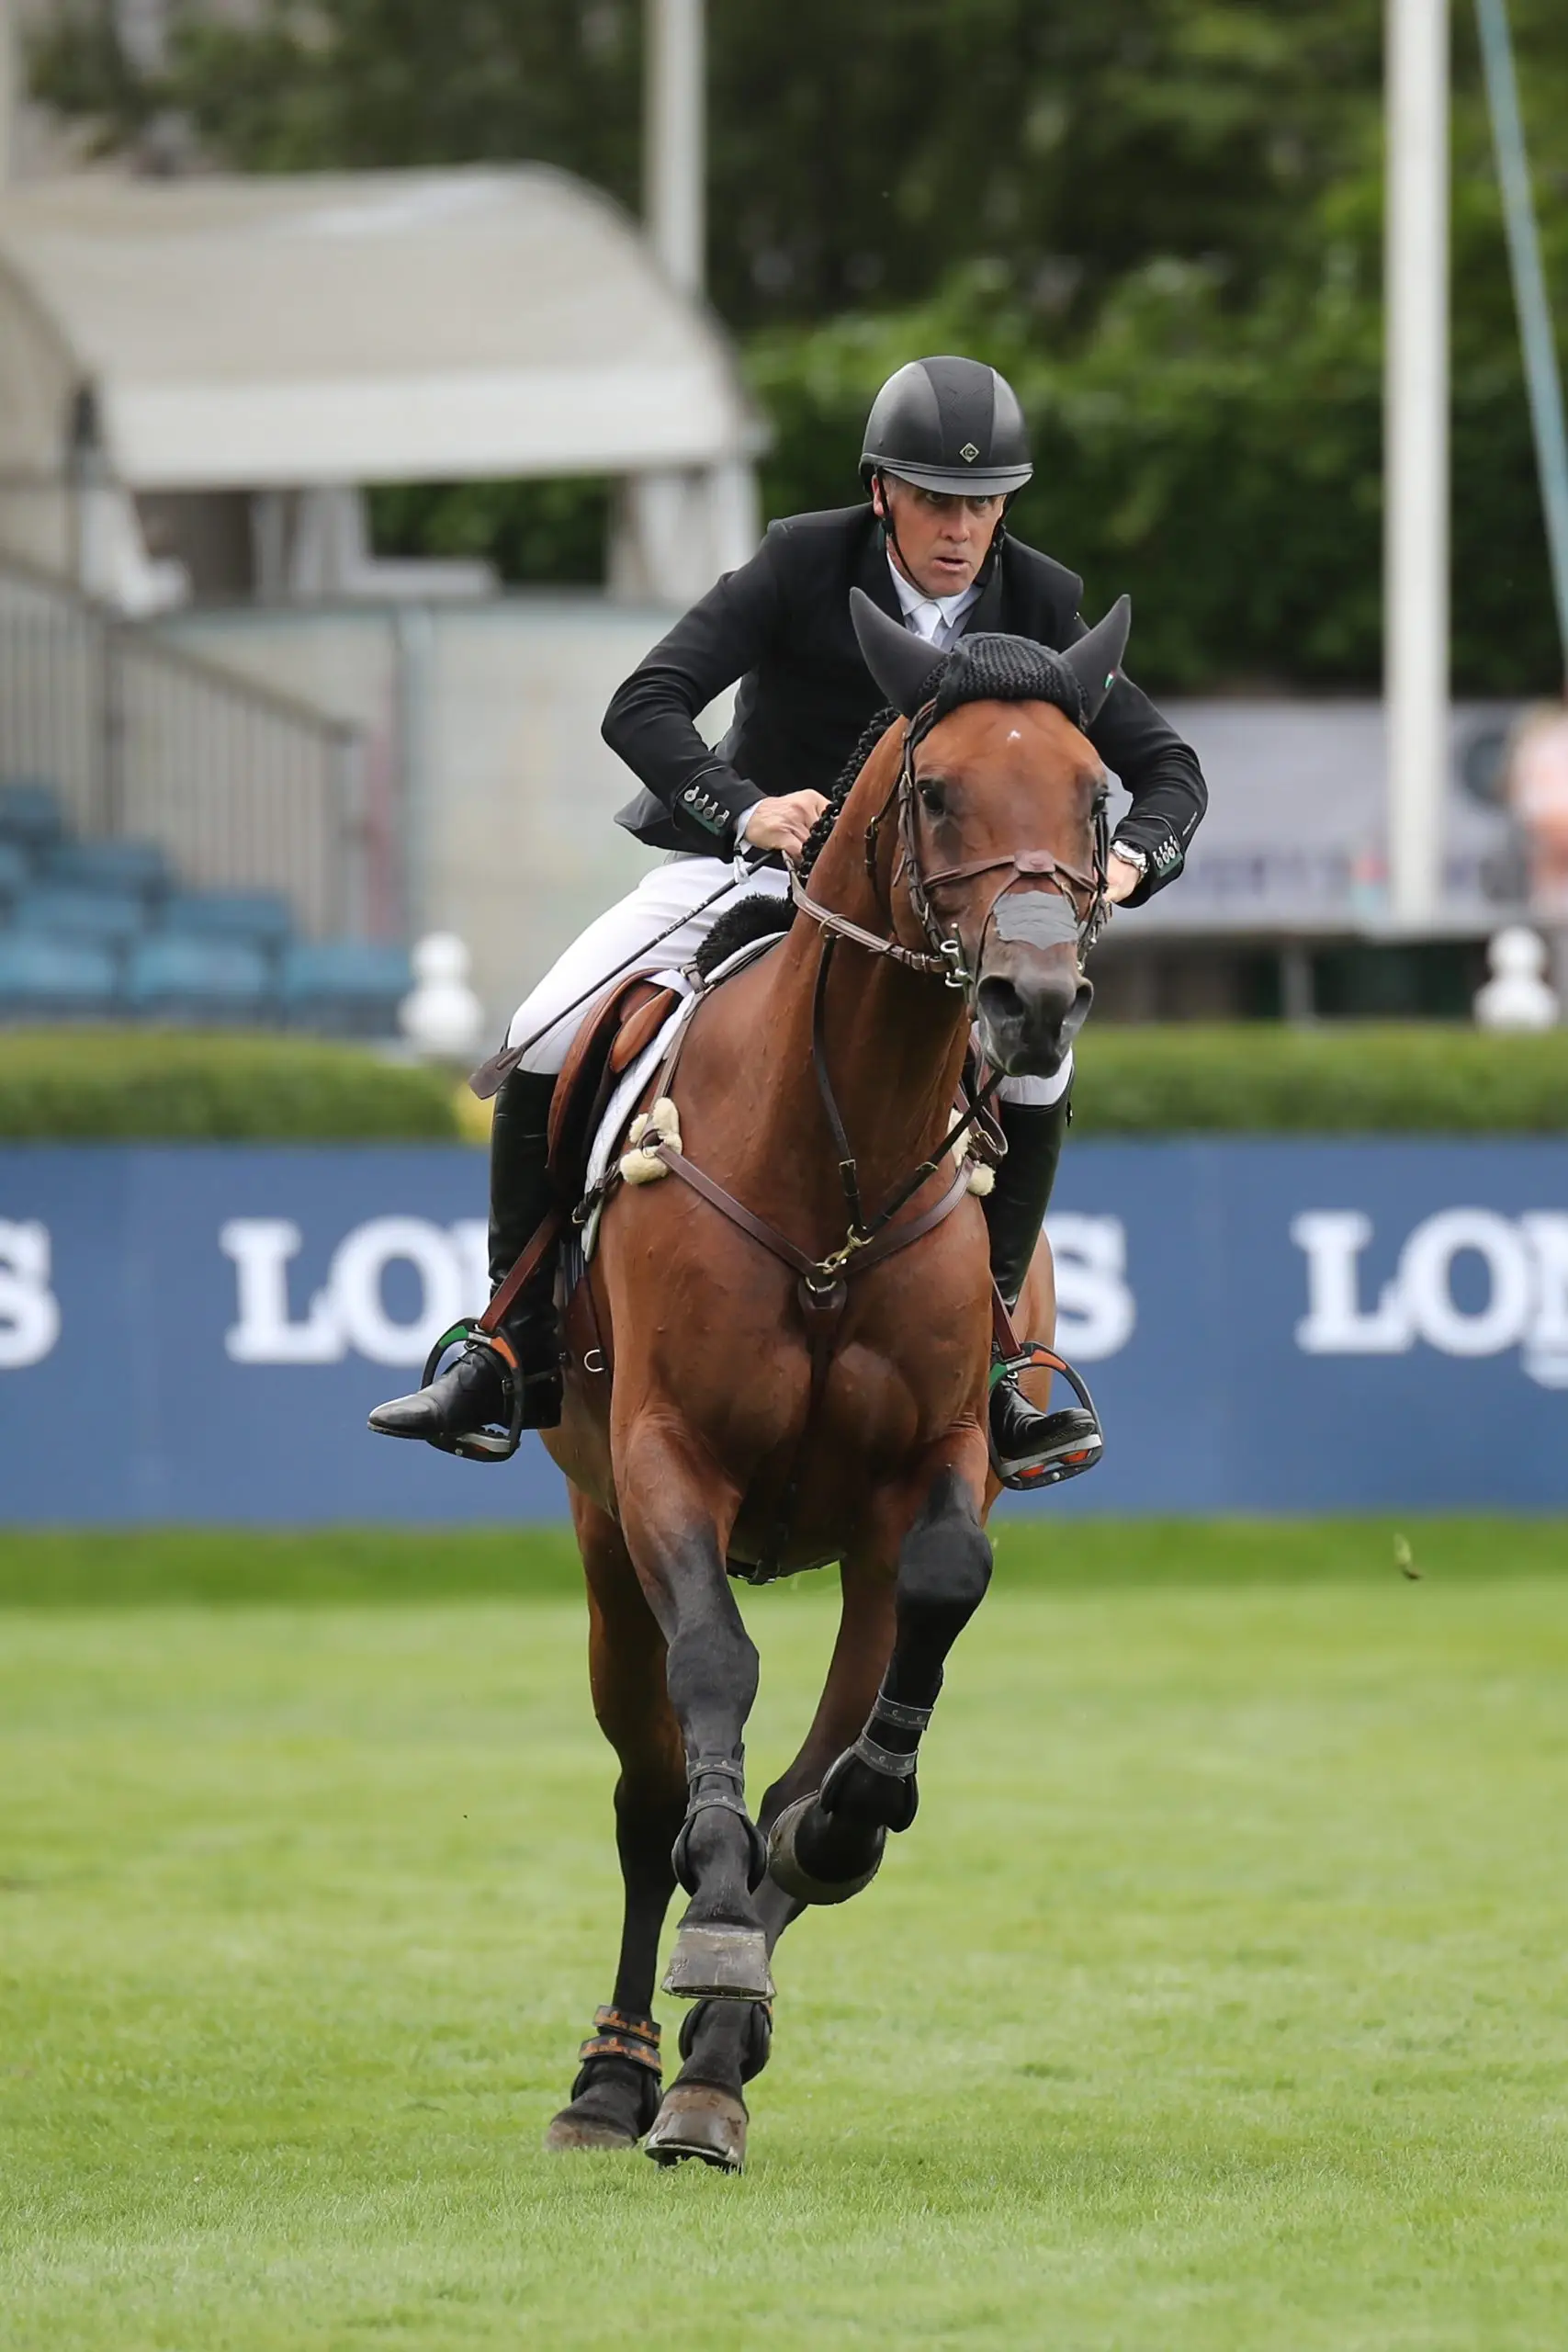 Shane Breen claims win on final day at Royal Windsor